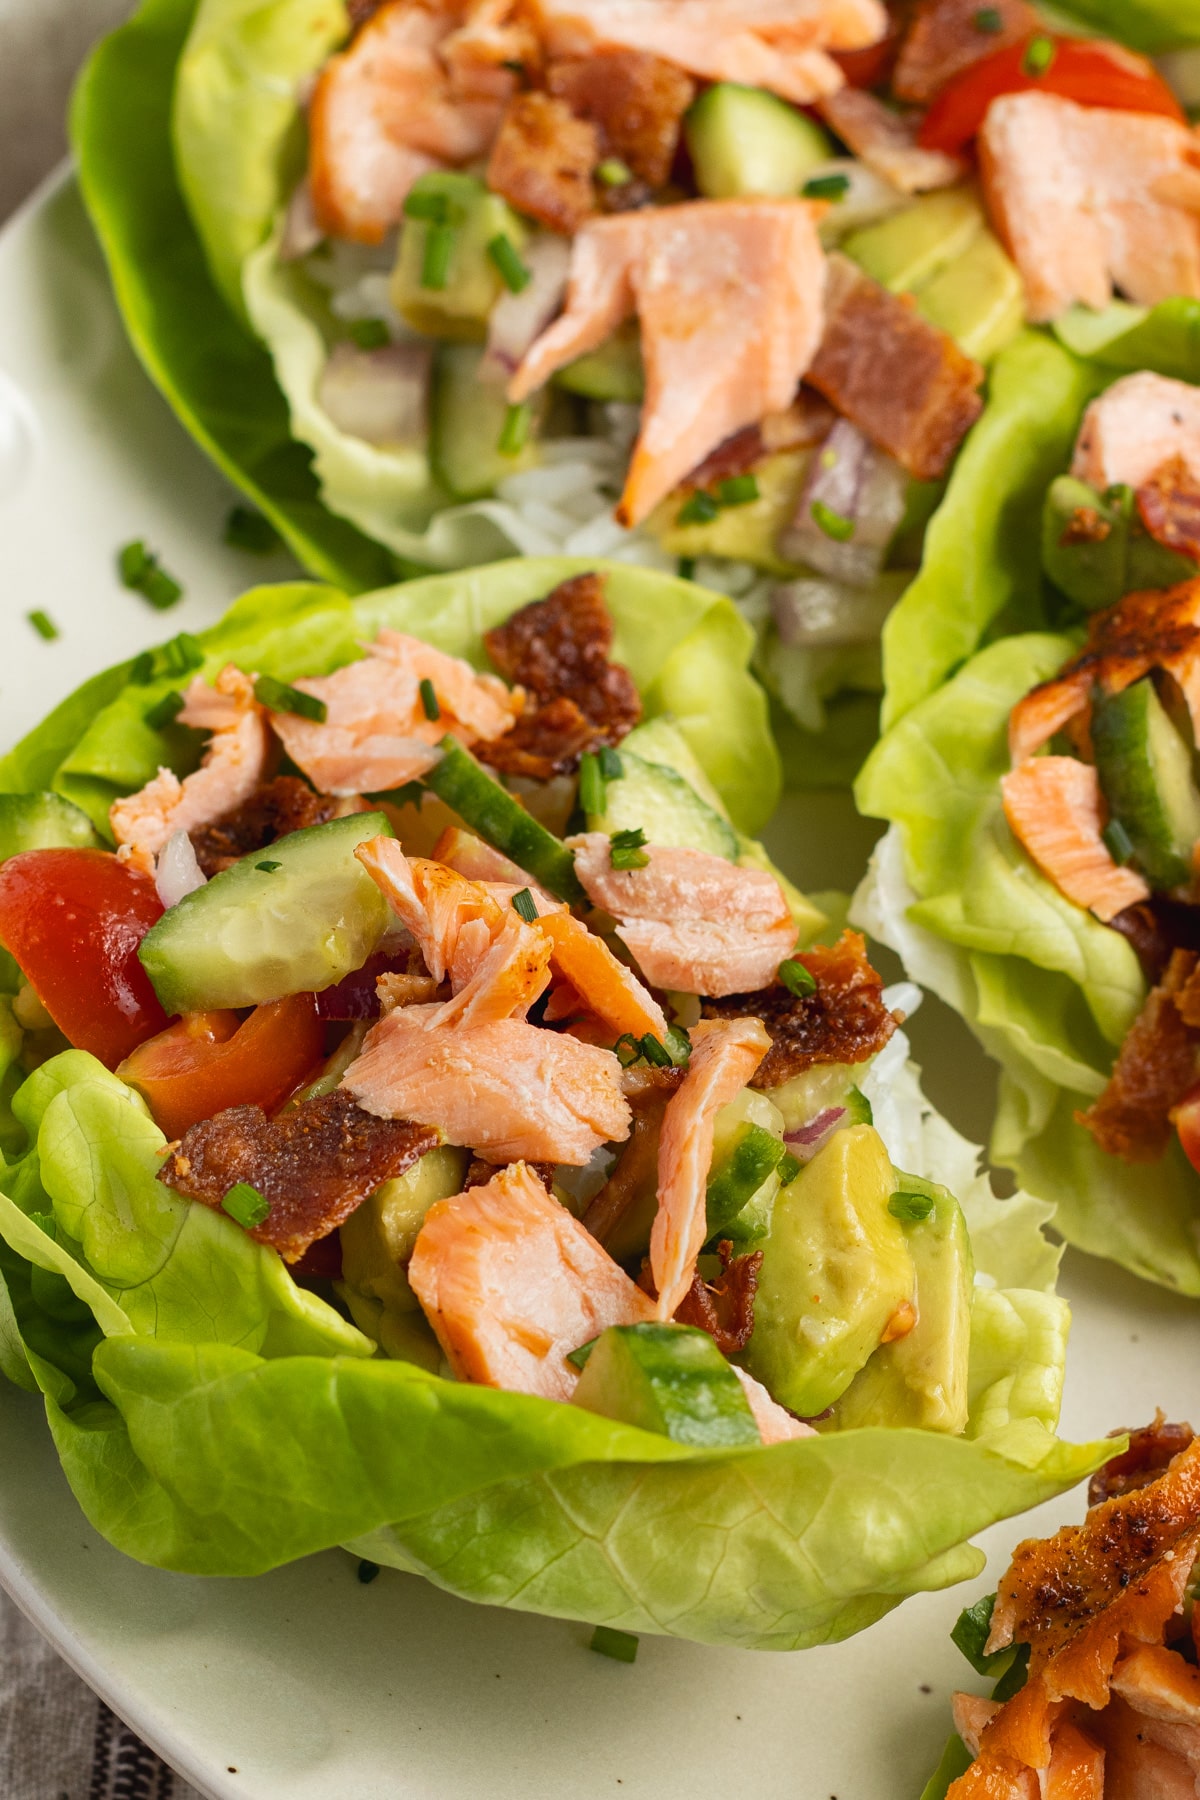 This is a picture of a salmon lettuce wrap close-up.